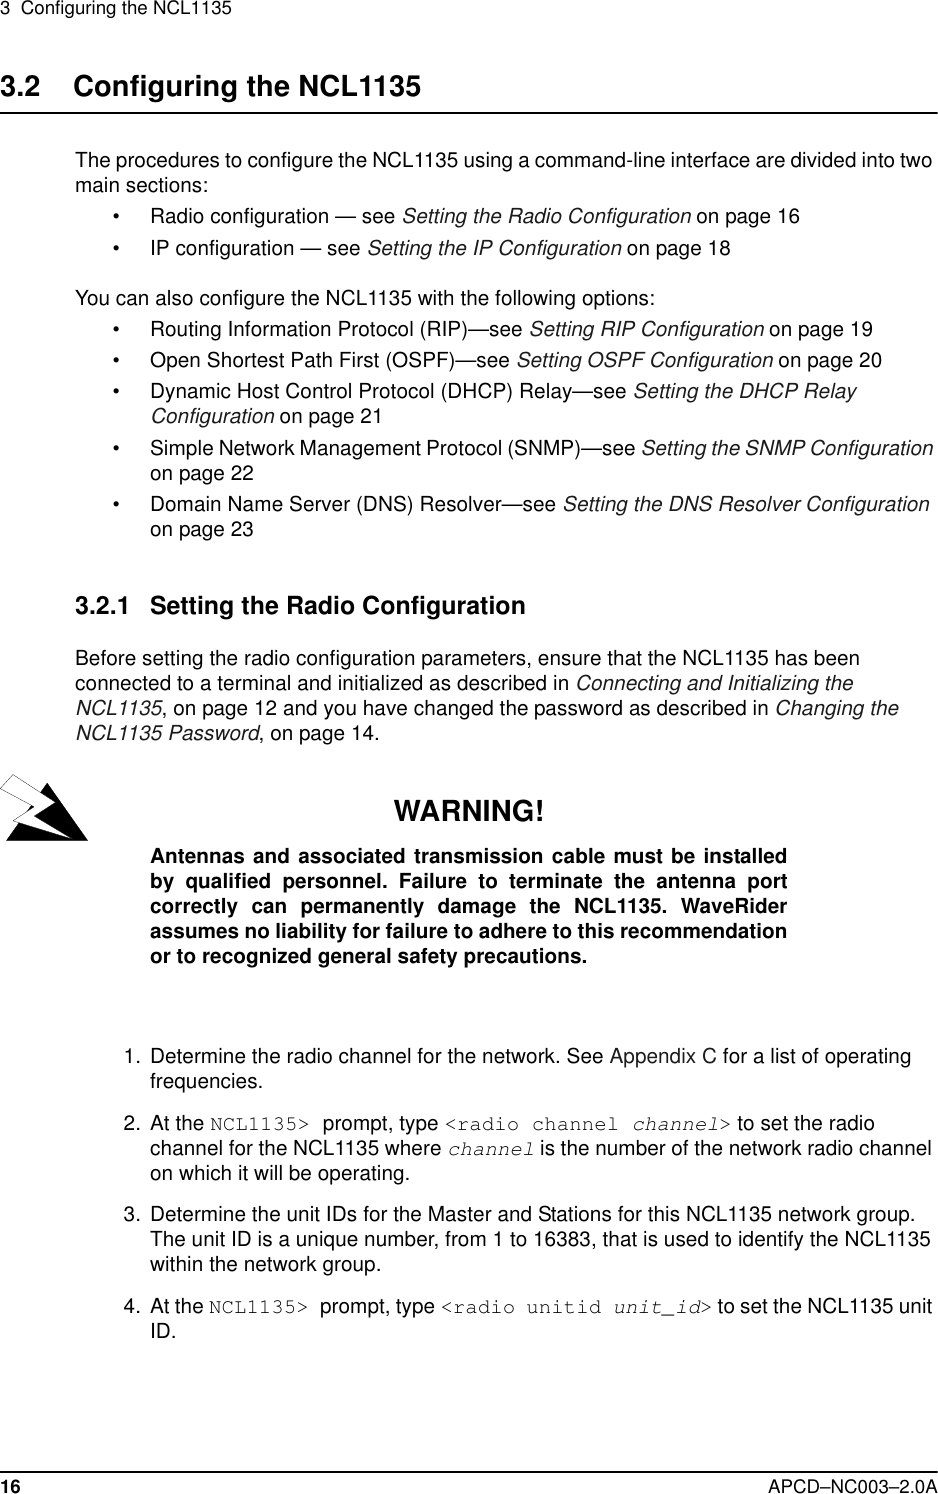 3  Configuring the NCL113516 APCD–NC003–2.0A3.2    Configuring the NCL1135The procedures to configure the NCL1135 using a command-line interface are divided into two main sections: •Radio configuration — see Setting the Radio Configuration on page 16•IP configuration — see Setting the IP Configuration on page 18You can also configure the NCL1135 with the following options:•Routing Information Protocol (RIP)—see Setting RIP Configuration on page 19•Open Shortest Path First (OSPF)—see Setting OSPF Configuration on page 20•Dynamic Host Control Protocol (DHCP) Relay—see Setting the DHCP Relay Configuration on page 21•Simple Network Management Protocol (SNMP)—see Setting the SNMP Configuration on page 22•Domain Name Server (DNS) Resolver—see Setting the DNS Resolver Configuration on page 233.2.1 Setting the Radio ConfigurationBefore setting the radio configuration parameters, ensure that the NCL1135 has been connected to a terminal and initialized as described in Connecting and Initializing the NCL1135, on page 12 and you have changed the password as described in Changing the NCL1135 Password, on page 14. WARNING!Antennas and associated transmission cable must be installedby qualified personnel. Failure to terminate the antenna portcorrectly can permanently damage the NCL1135. WaveRiderassumes no liability for failure to adhere to this recommendationor to recognized general safety precautions.  1.  Determine the radio channel for the network. See Appendix C for a list of operating frequencies.  2. At the NCL1135&gt; prompt, type &lt;radio channel channel&gt; to set the radio channel for the NCL1135 where channel is the number of the network radio channel on which it will be operating.  3. Determine the unit IDs for the Master and Stations for this NCL1135 network group. The unit ID is a unique number, from 1 to 16383, that is used to identify the NCL1135 within the network group. 4. At the NCL1135&gt; prompt, type &lt;radio unitid unit_id&gt; to set the NCL1135 unit ID. 